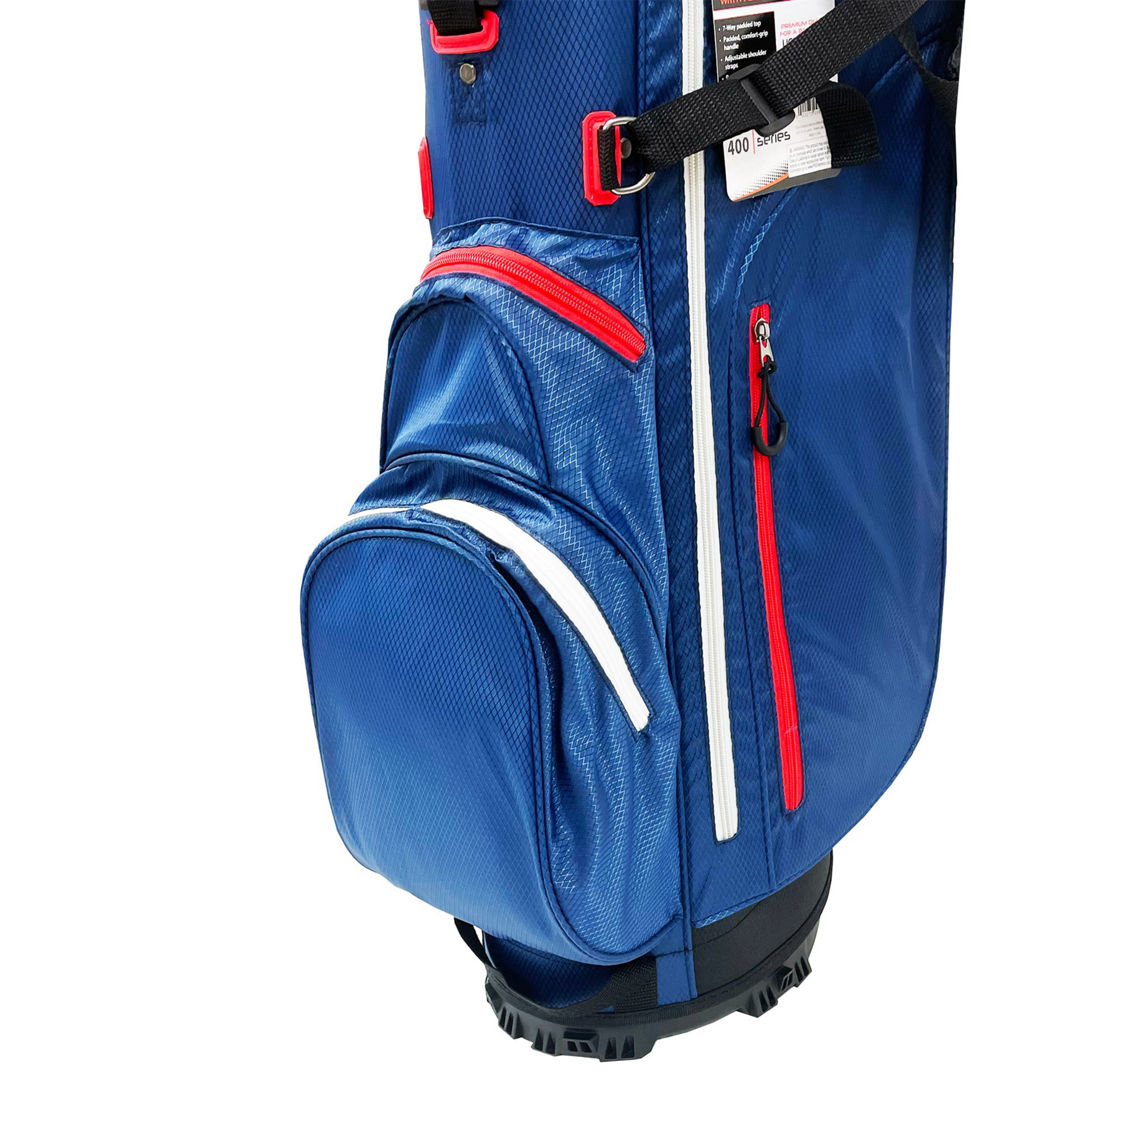 GOLF GIFTS & GALLERY 400 SERIES STAND BAG RED WHT BLU - Image 5 of 5